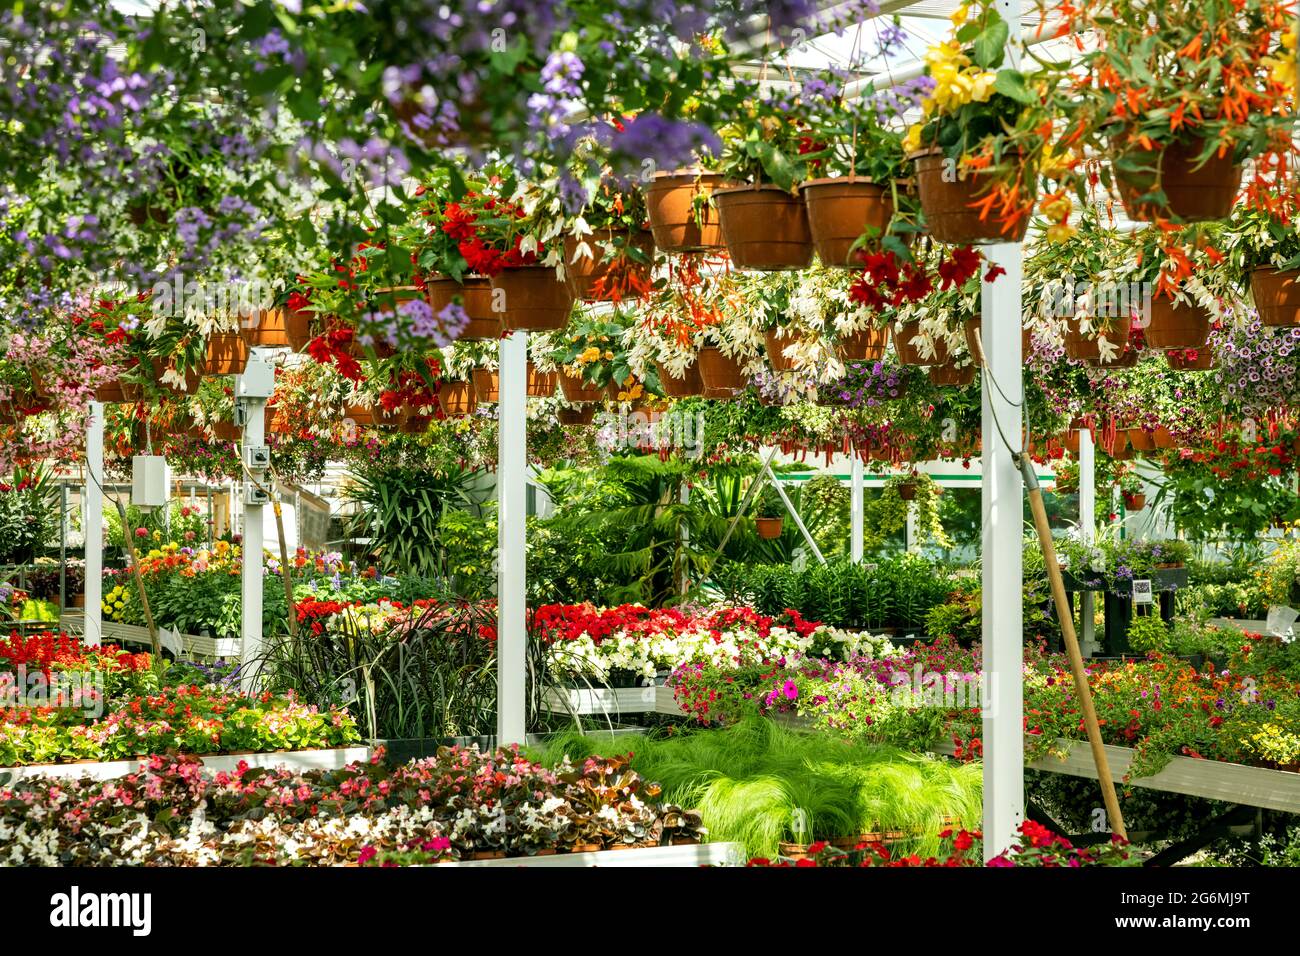 garden center greenhouse with colorful flowers and ornamental plants for sale Stock Photo